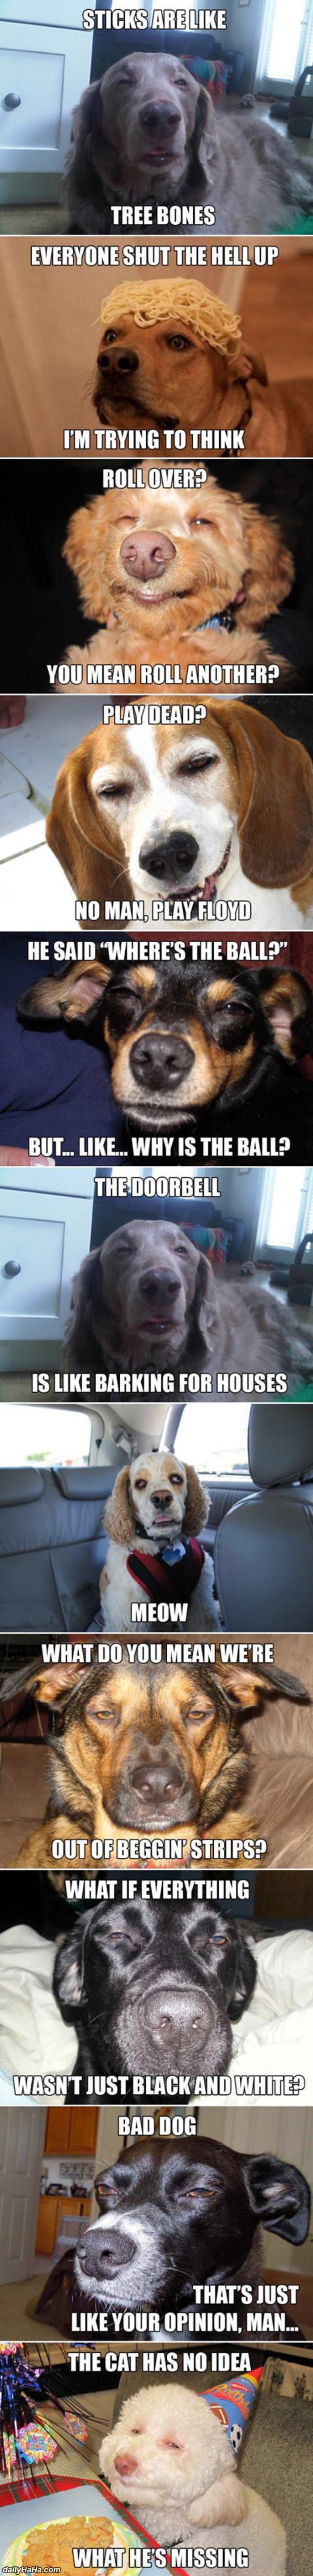 stoner dogs funny picture